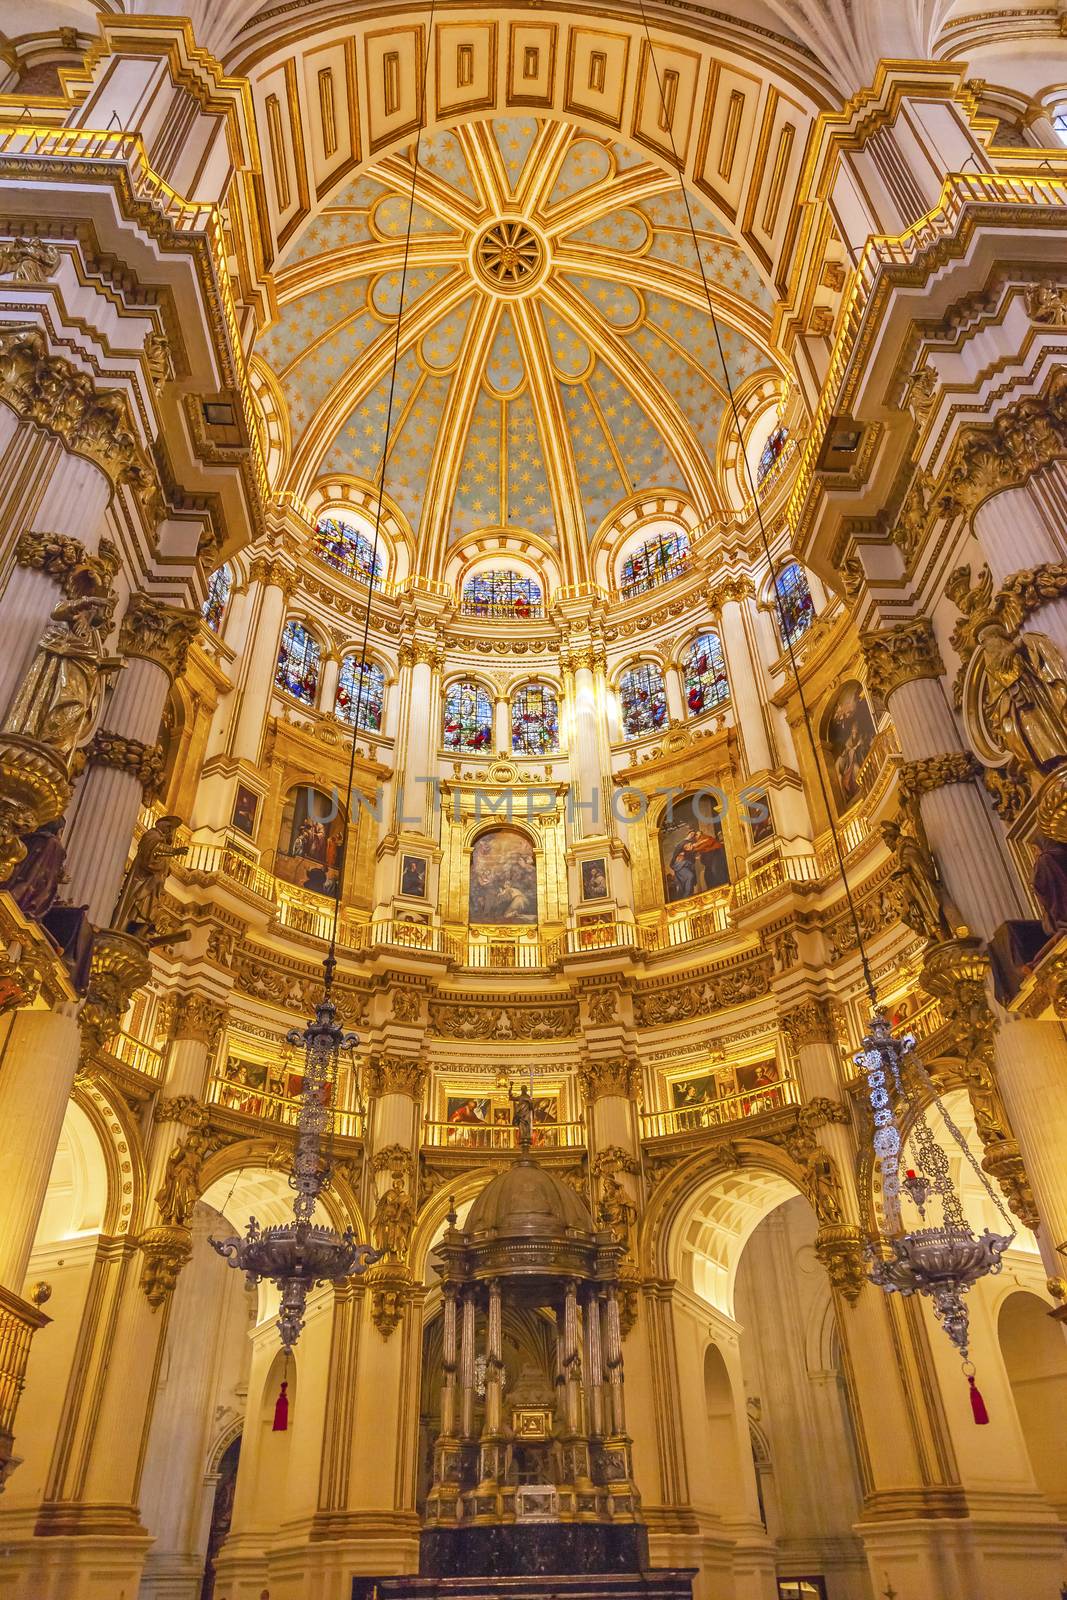 Basilica Dome Stained Glass Cathedral Andalusia Grandada Spain.  Built in the 1500s, housing the tombs of King Ferdinand and Isabella.  Dome by Diego de Siloe, 16th Century Stained Glass by Juan del Campo.